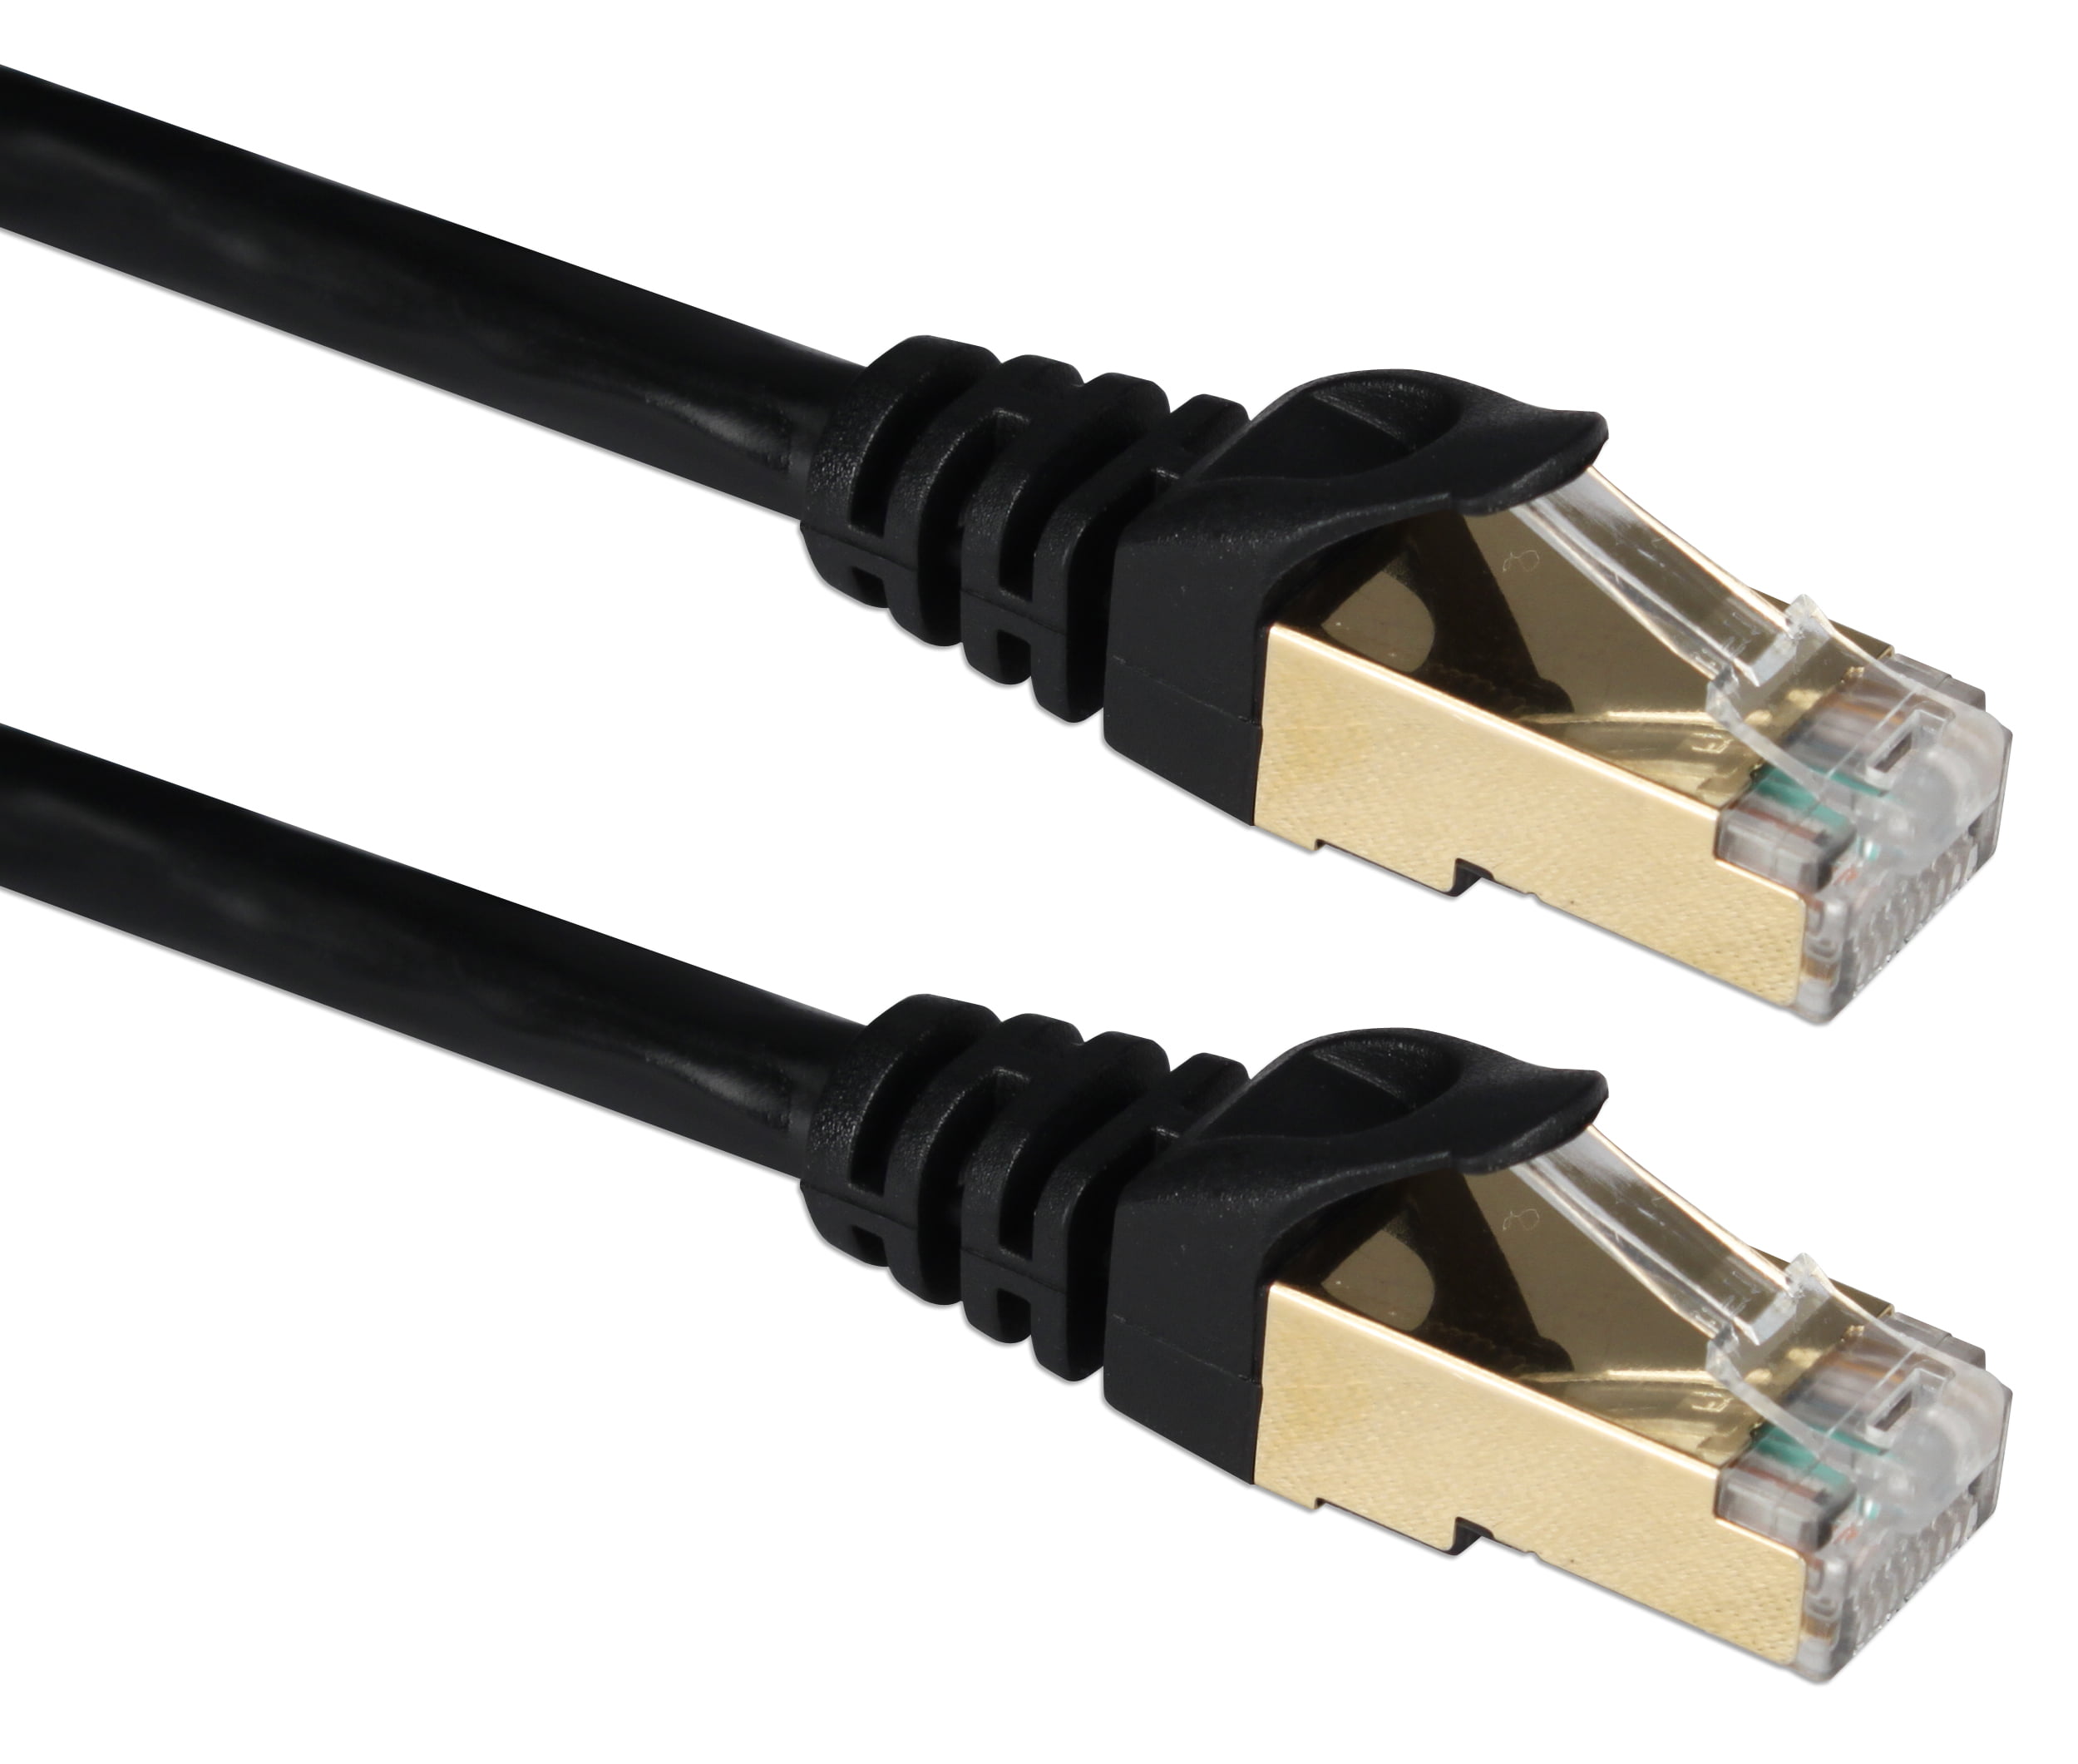 Fastest Shielded 10GB Cat 7 Computer Internet Cable Network Ethernet Cord STP 